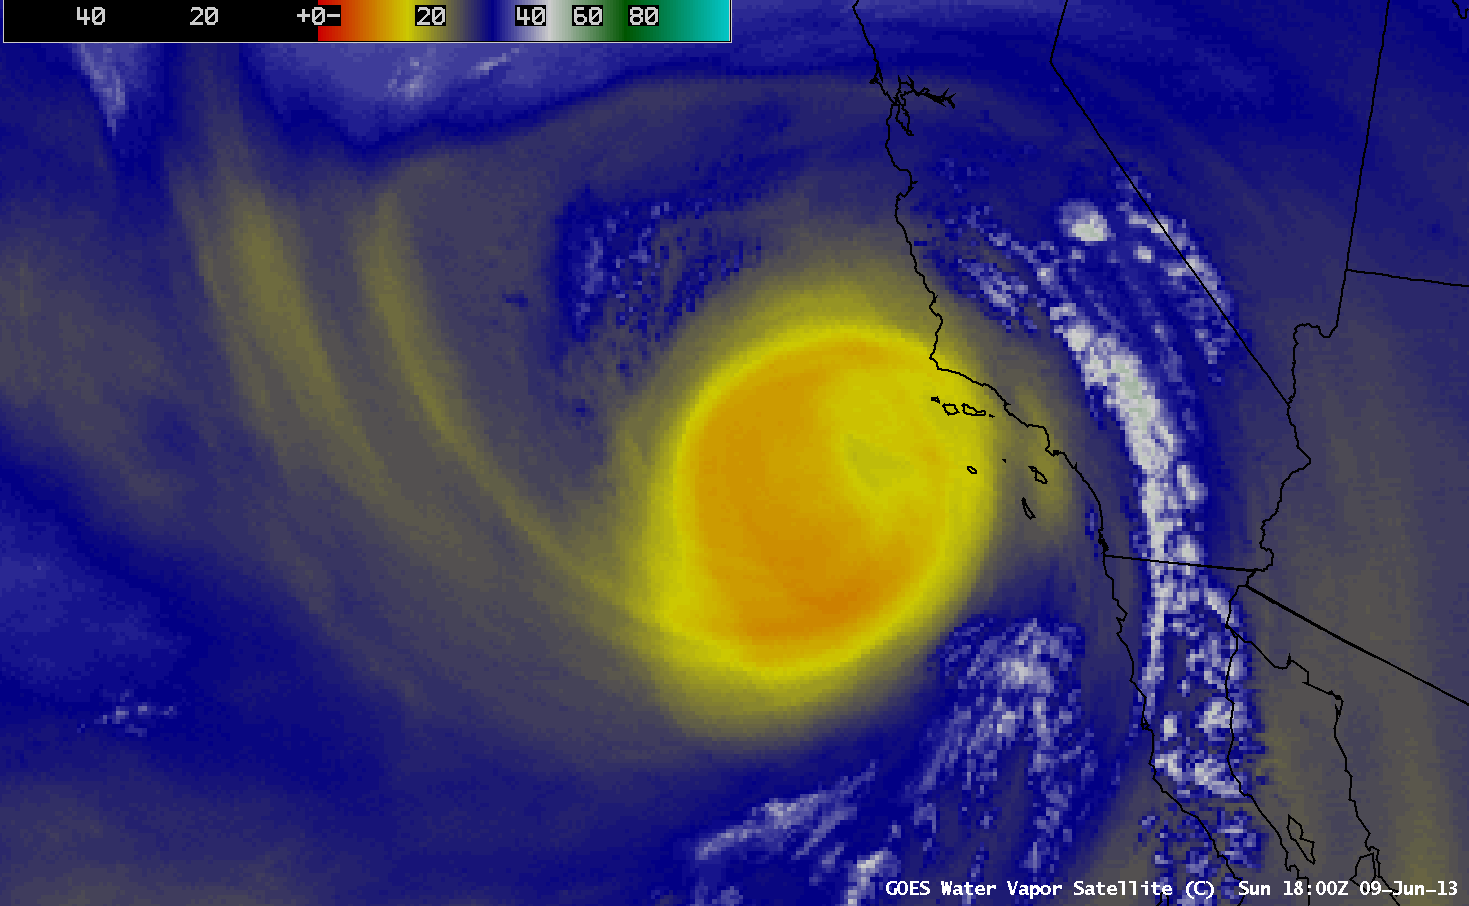 GOES-15 imager 6.5 Âµm water vapor channel image + GOES-15 sounder Total Column Ozone product (with overlays of CRAS model fields)